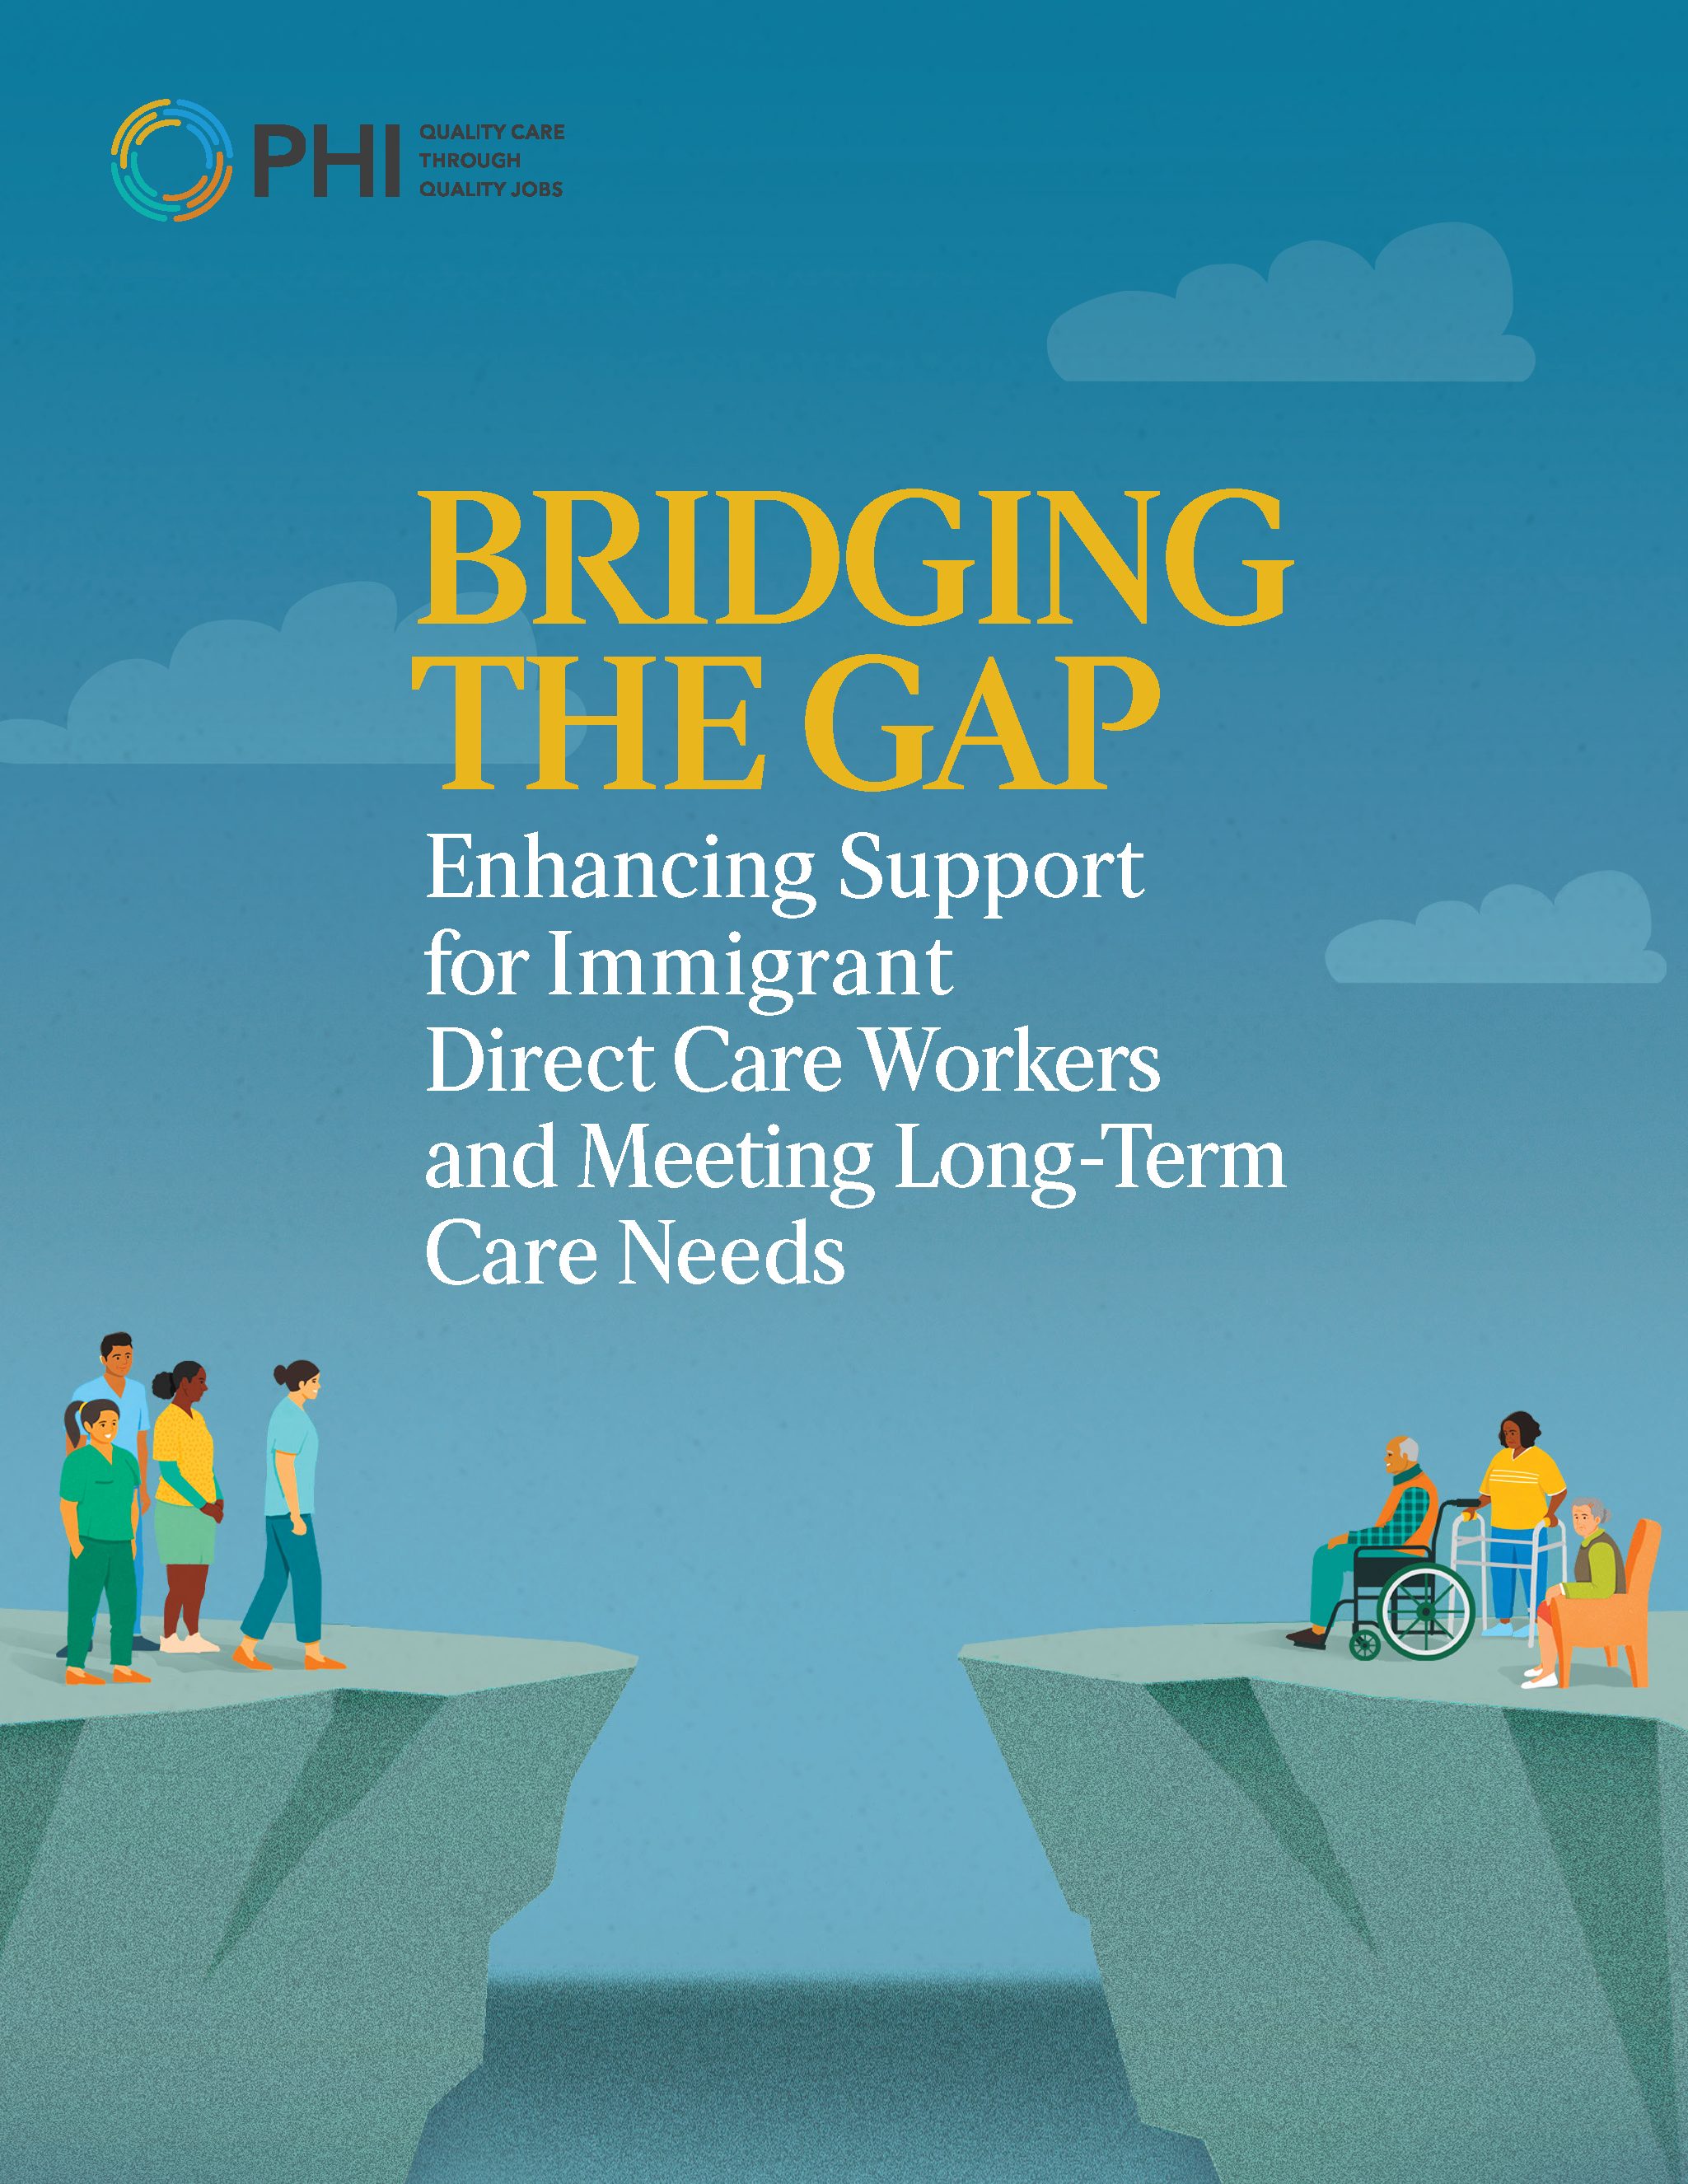 Bridging the Gap: Enhancing Support for Immigrant Direct Care Workers